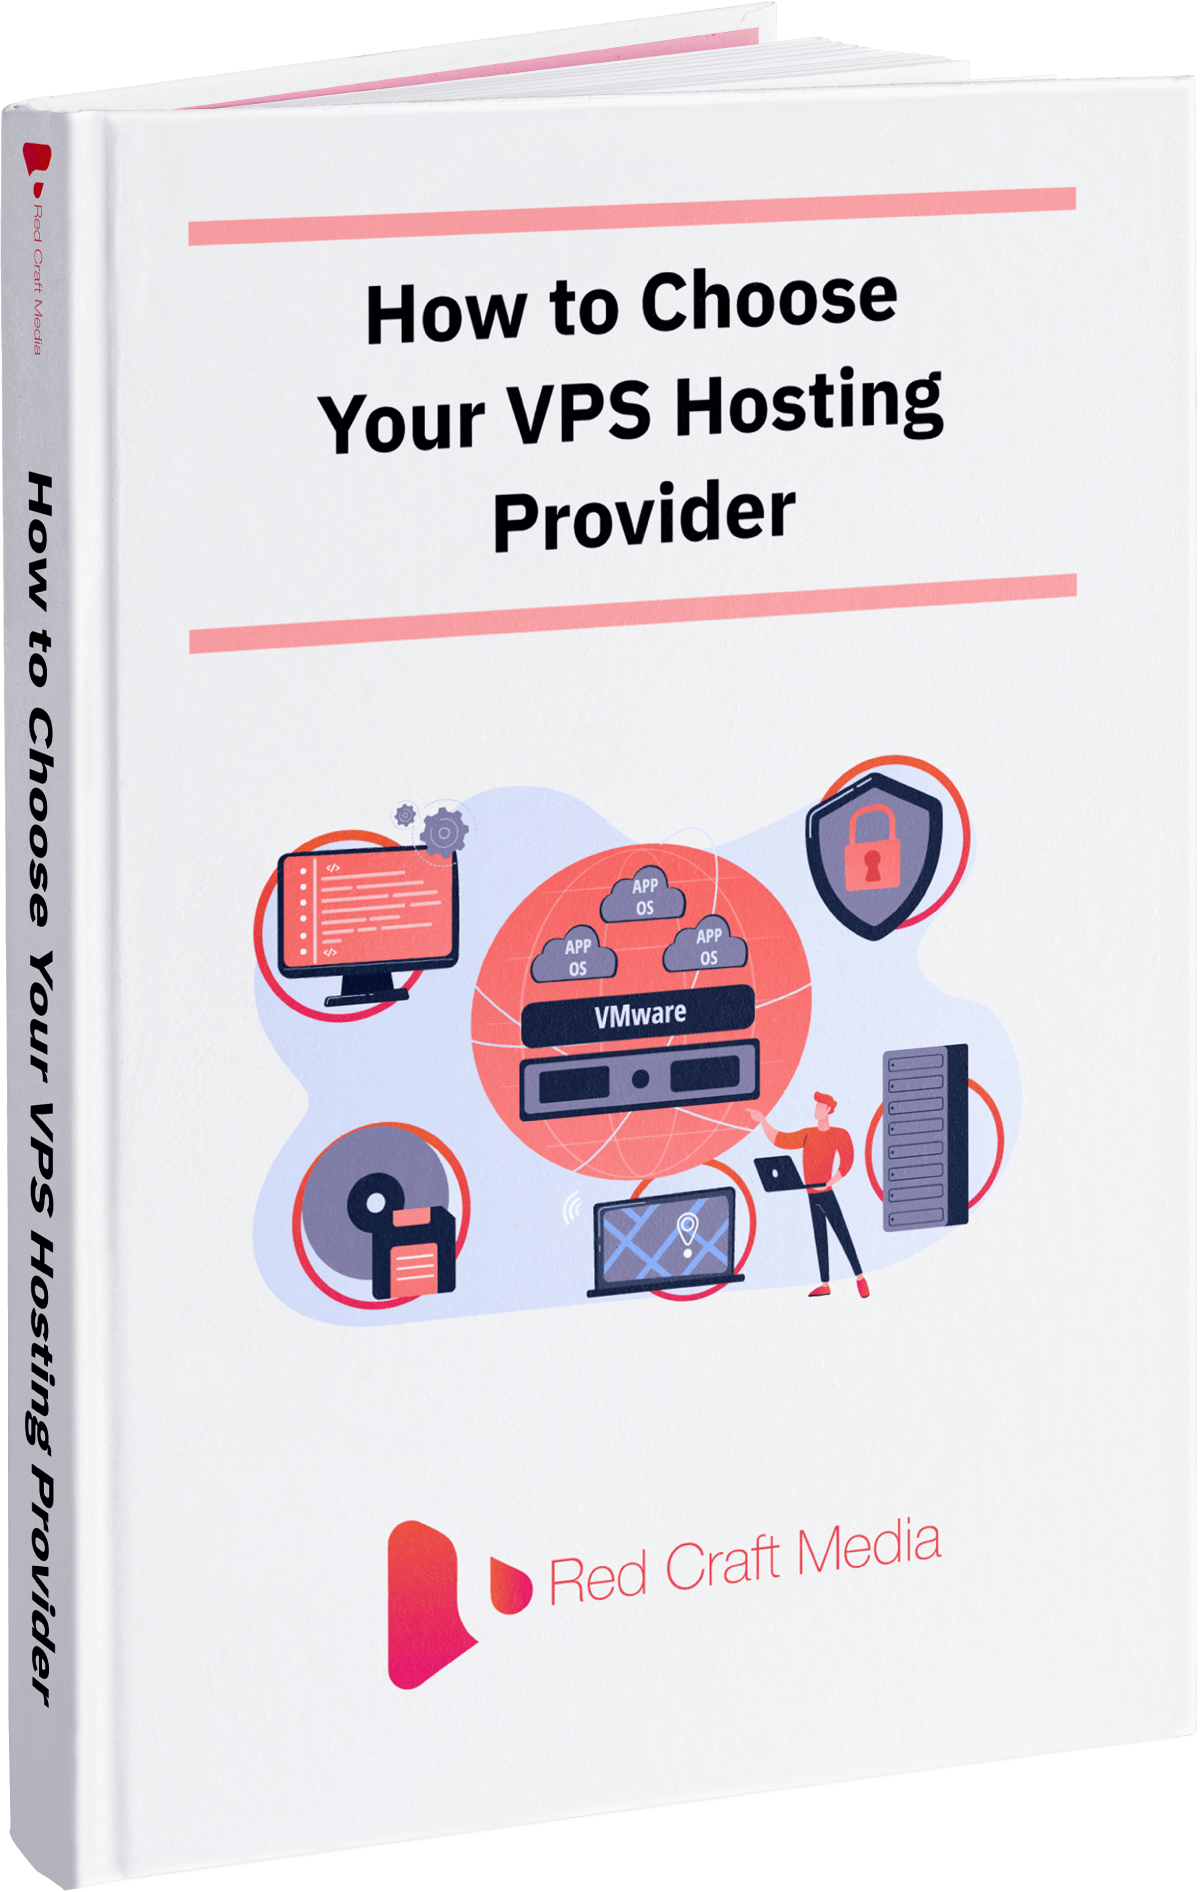 How to Choose Your VPS Hosting Provider